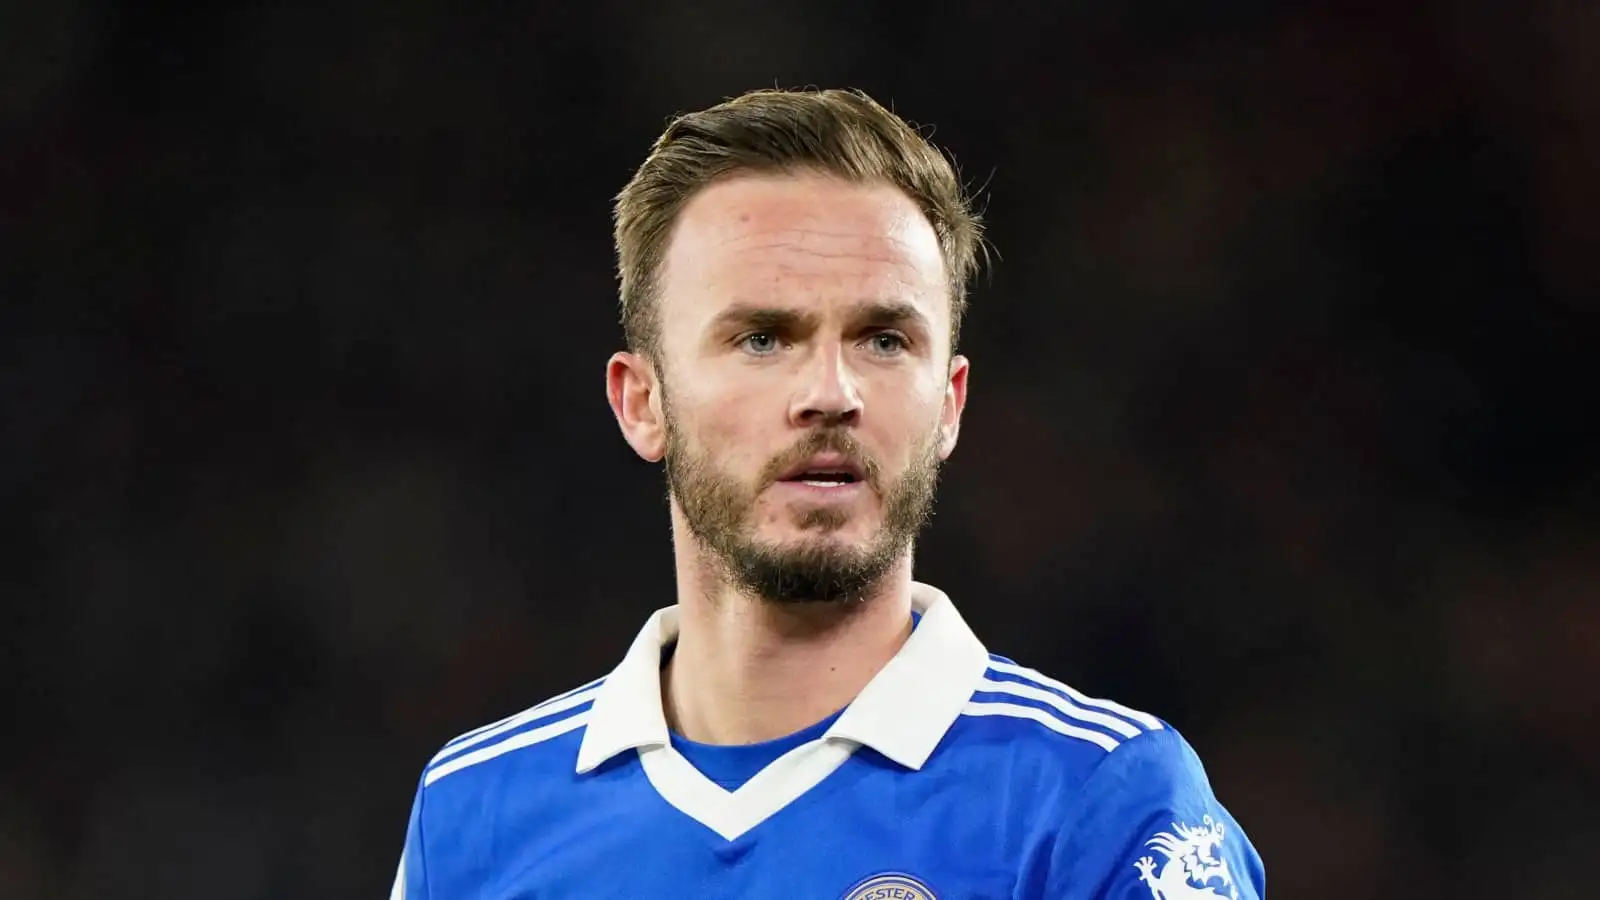 Leicester playmaker James Maddison